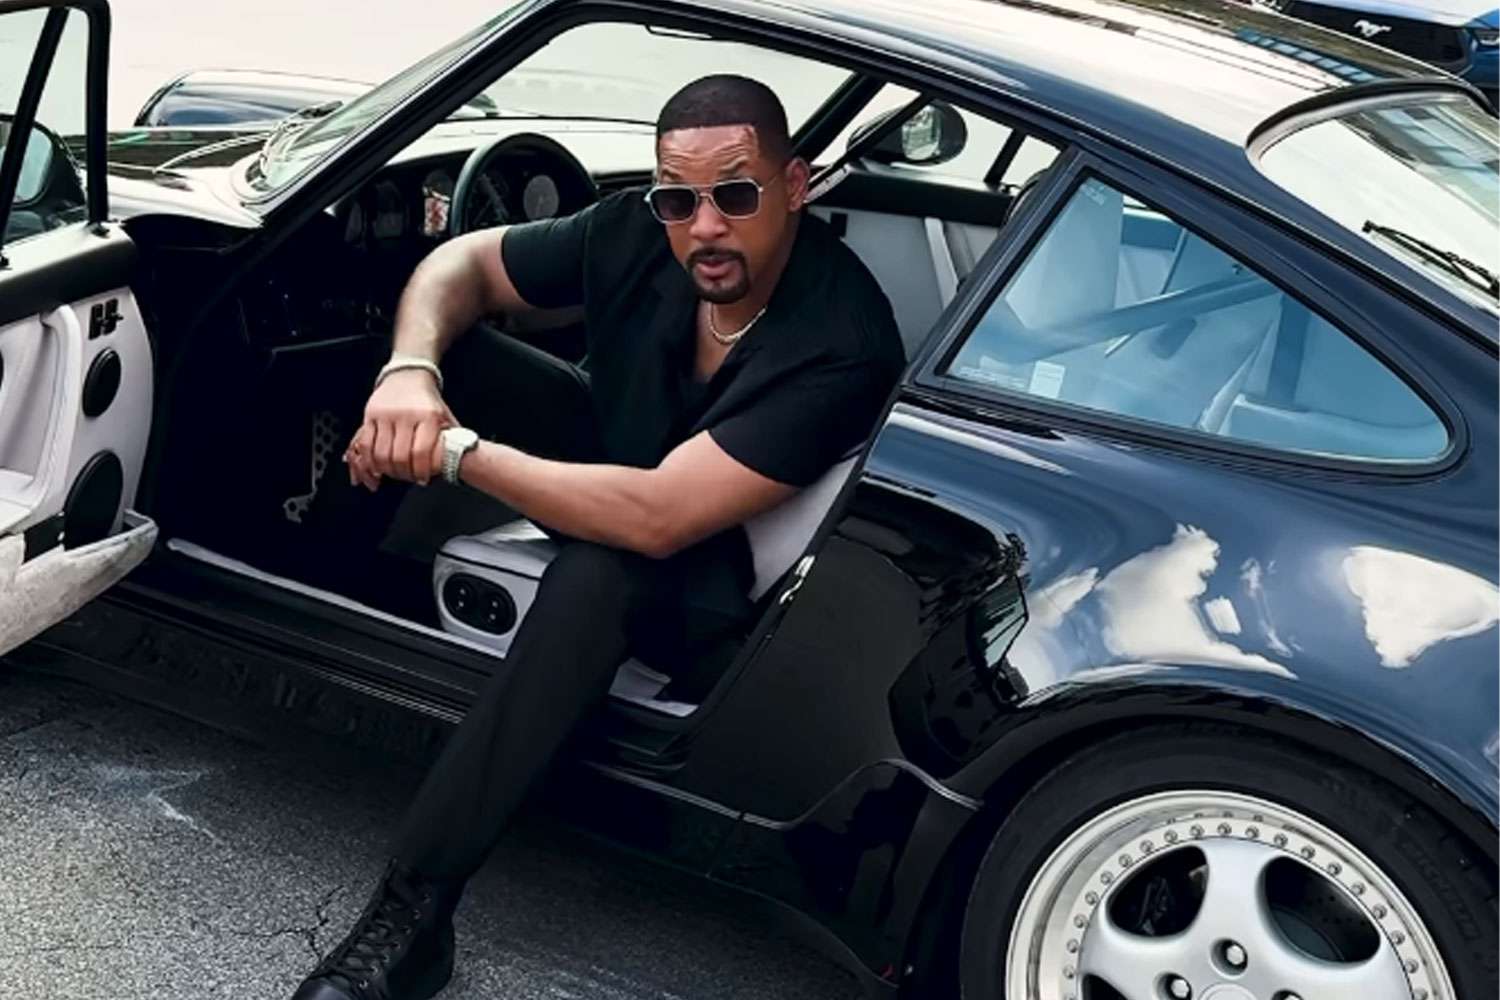 Will Smith Recreates Throwback “Bad Boys” Moment 29 Years Later: 'Long Time No See'